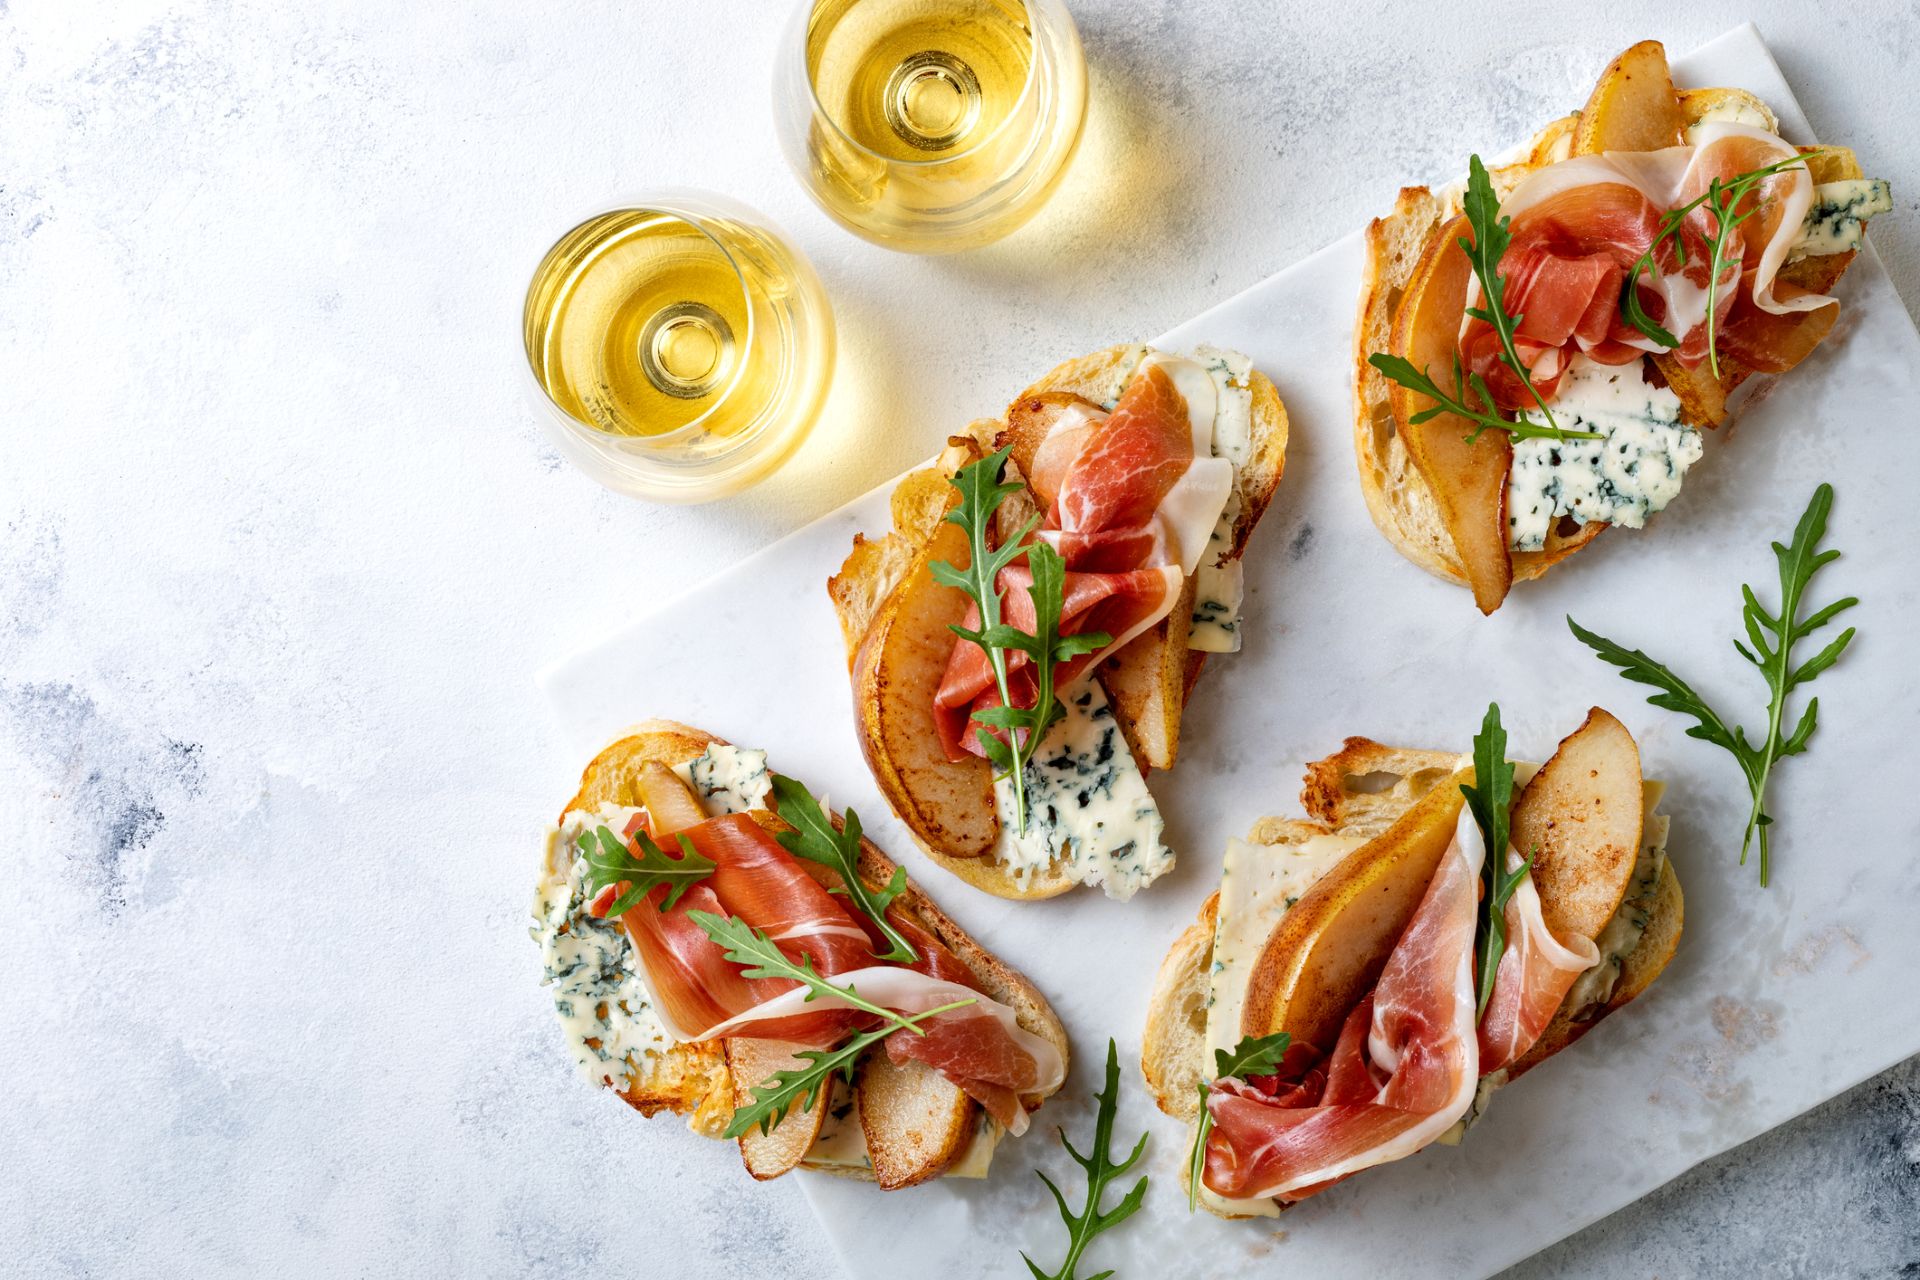 Top Your Own Crostini - Parents Canada